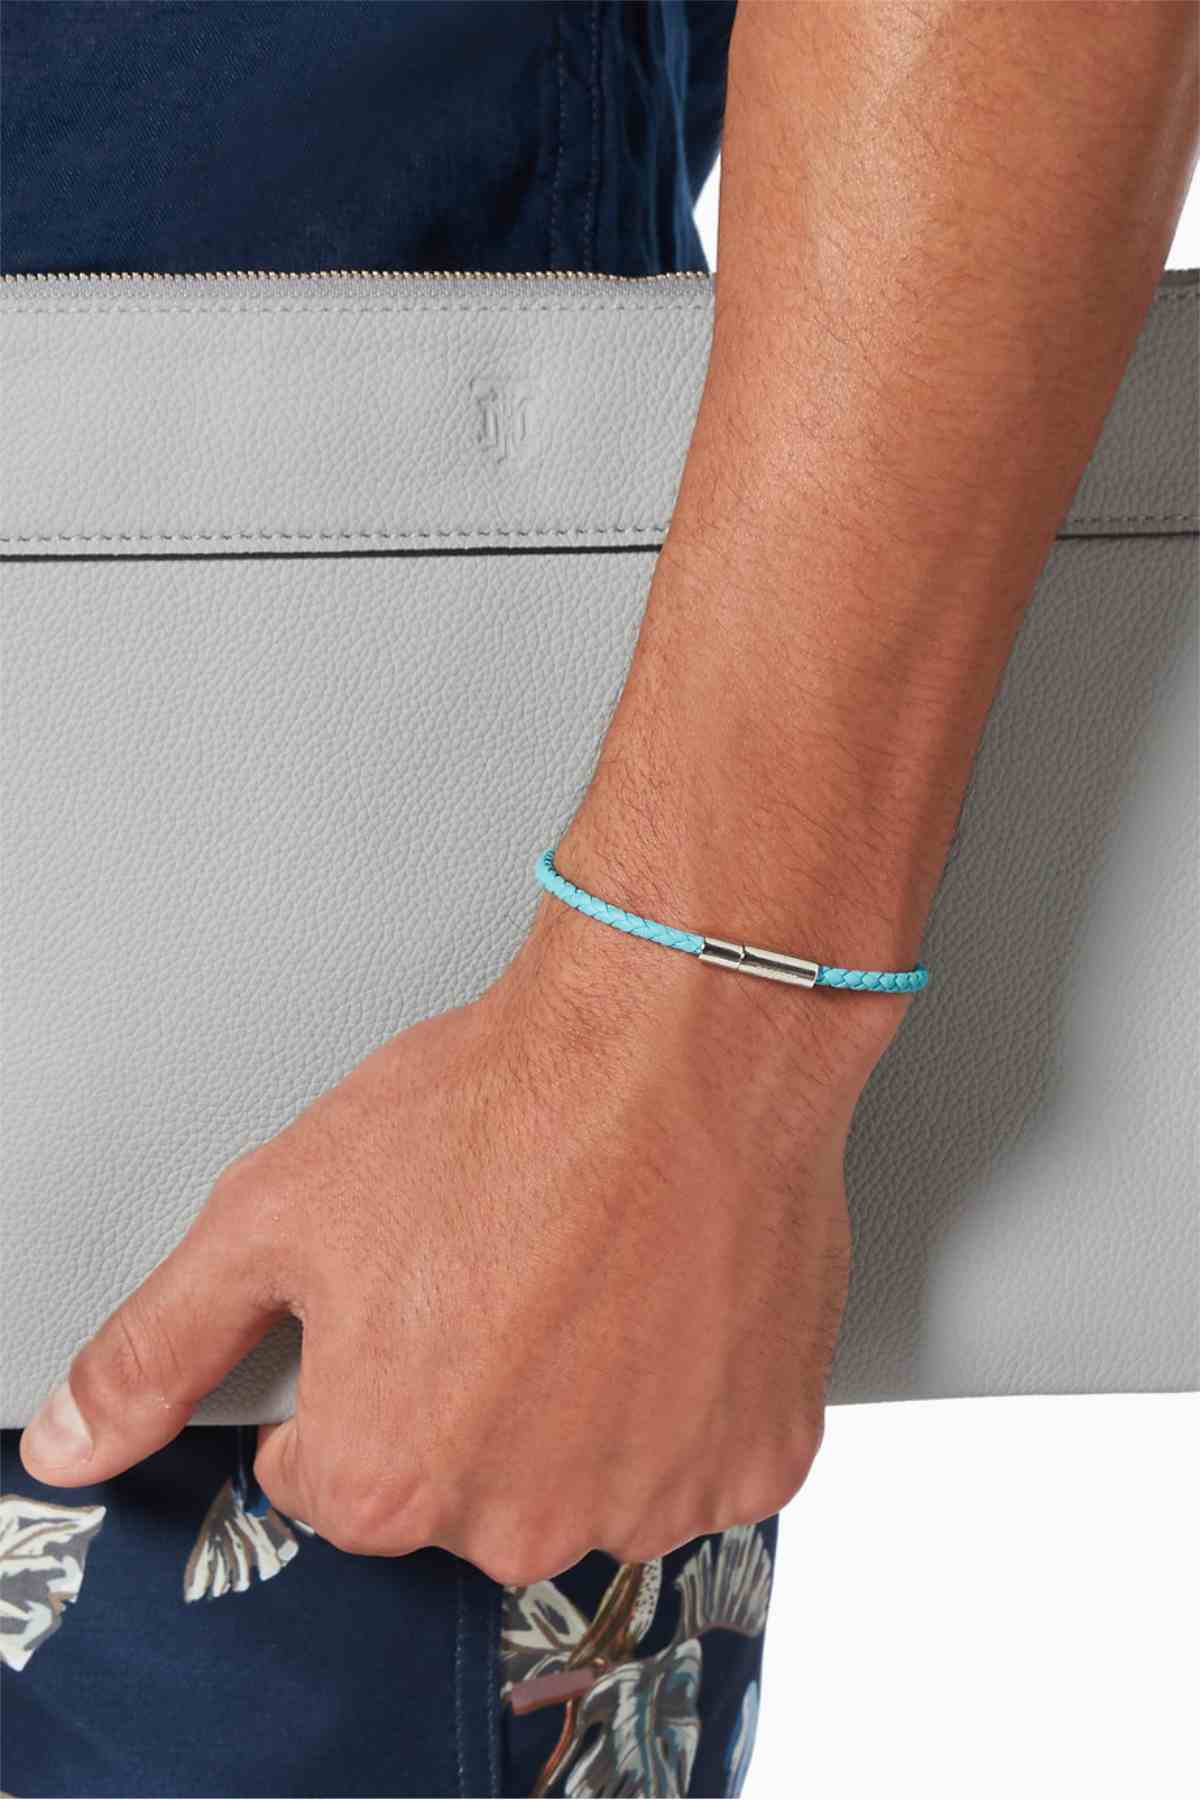 The New Gianni Bracelet: Summer on Your Wrist